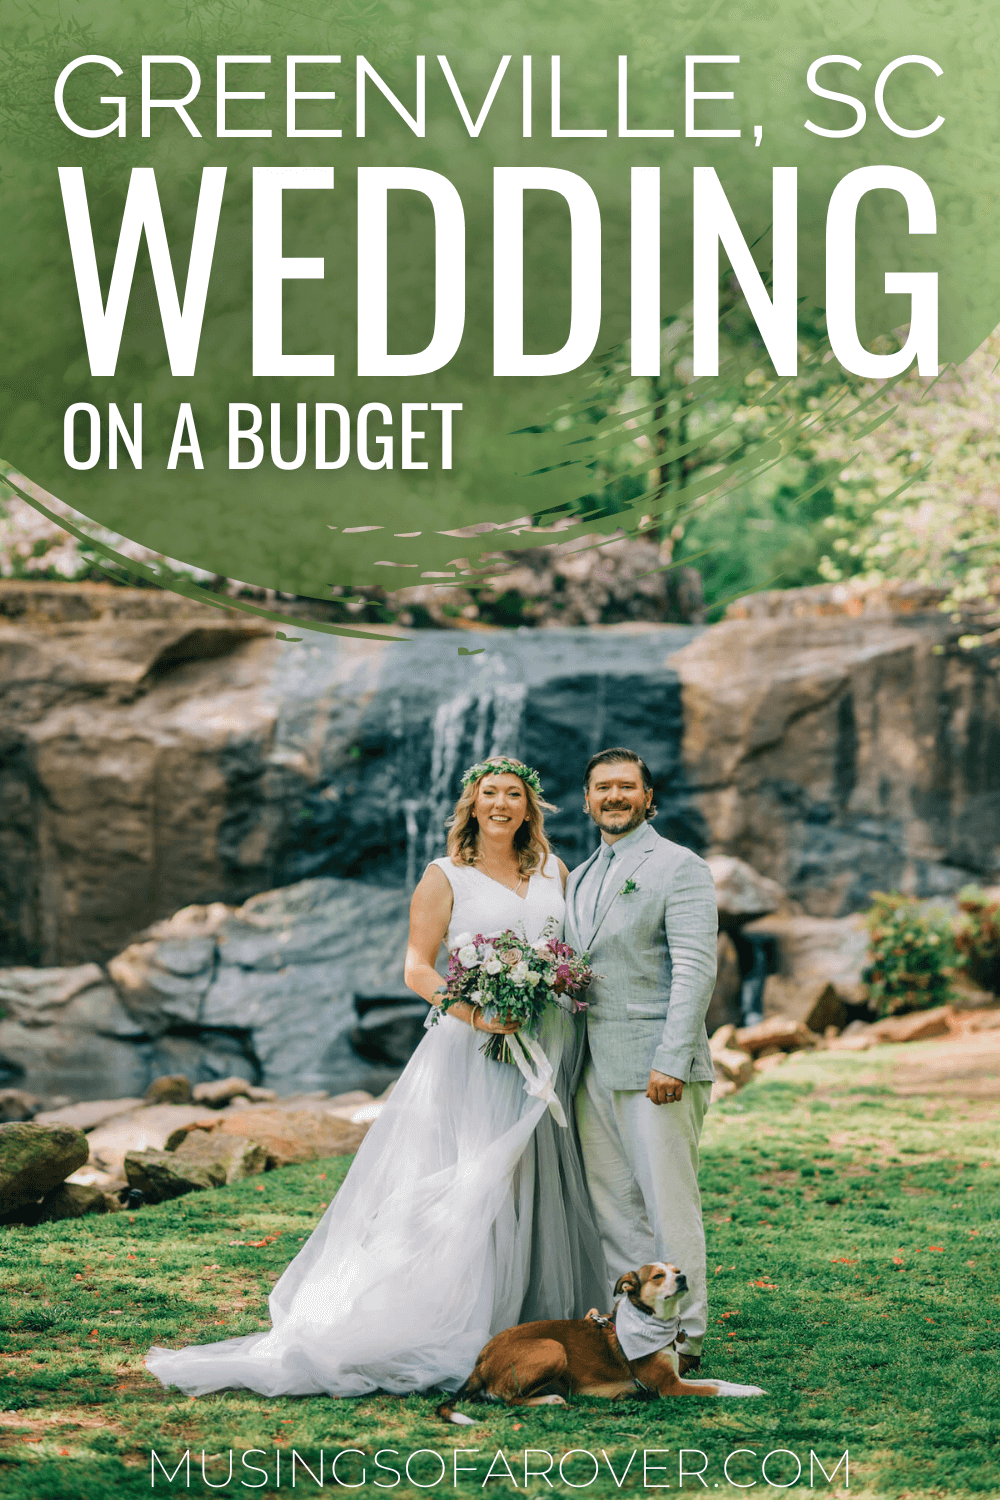 Planning a Greenville Wedding? Want to save money? Discover tips on how to lower your budget for your own celebration.